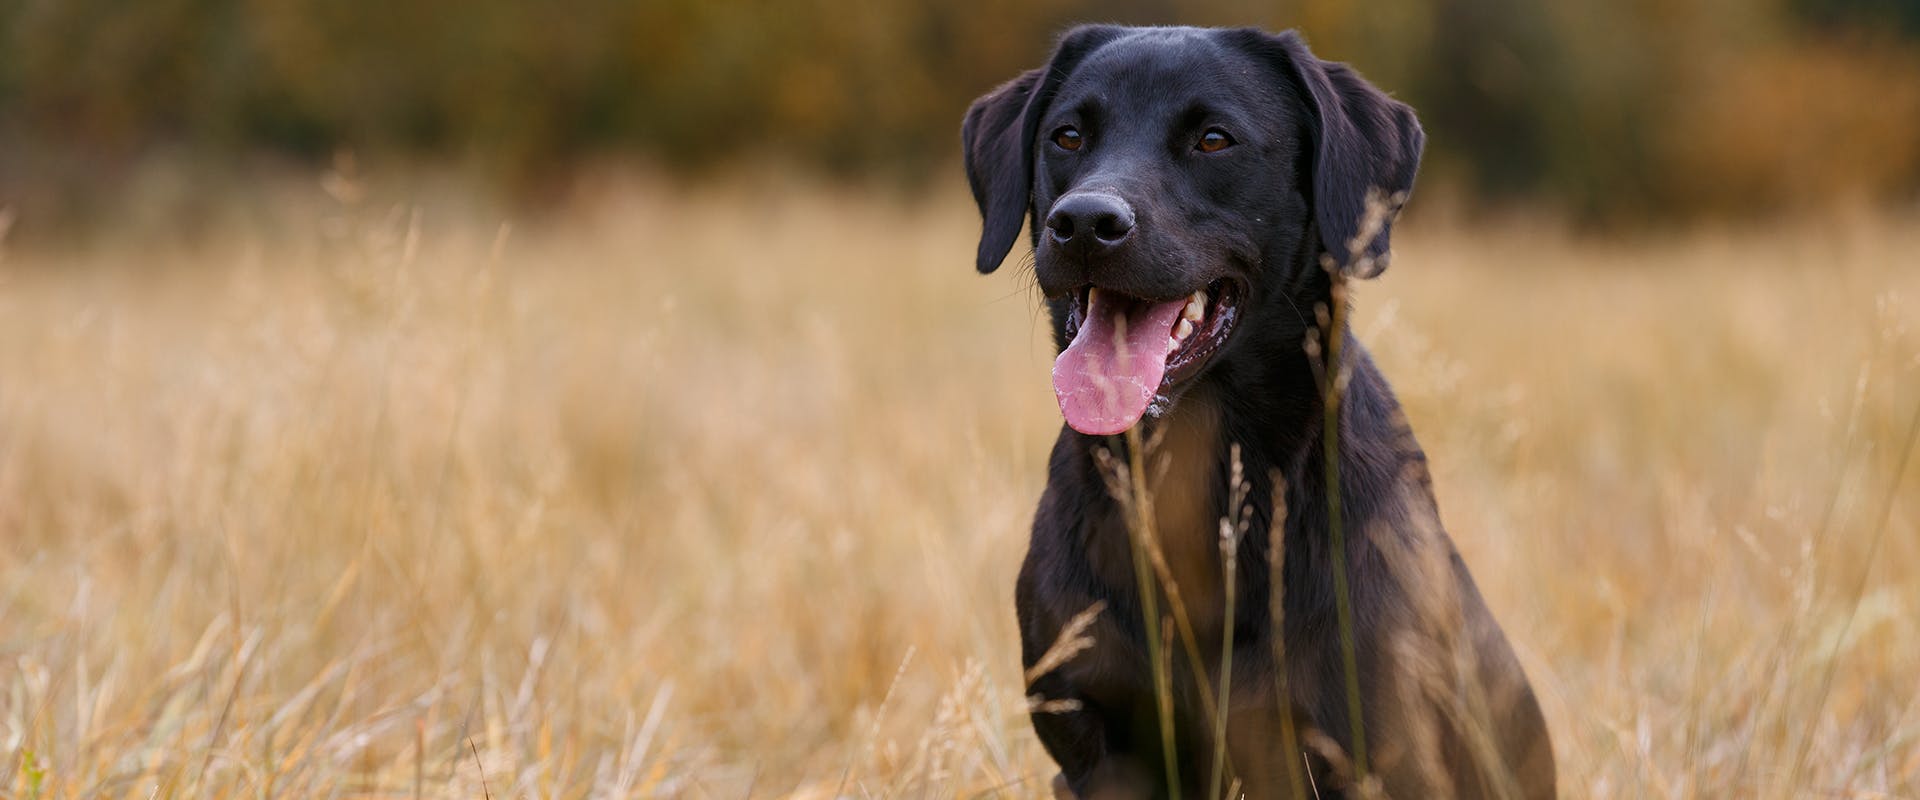 A black Labrador standing in a field of wheat